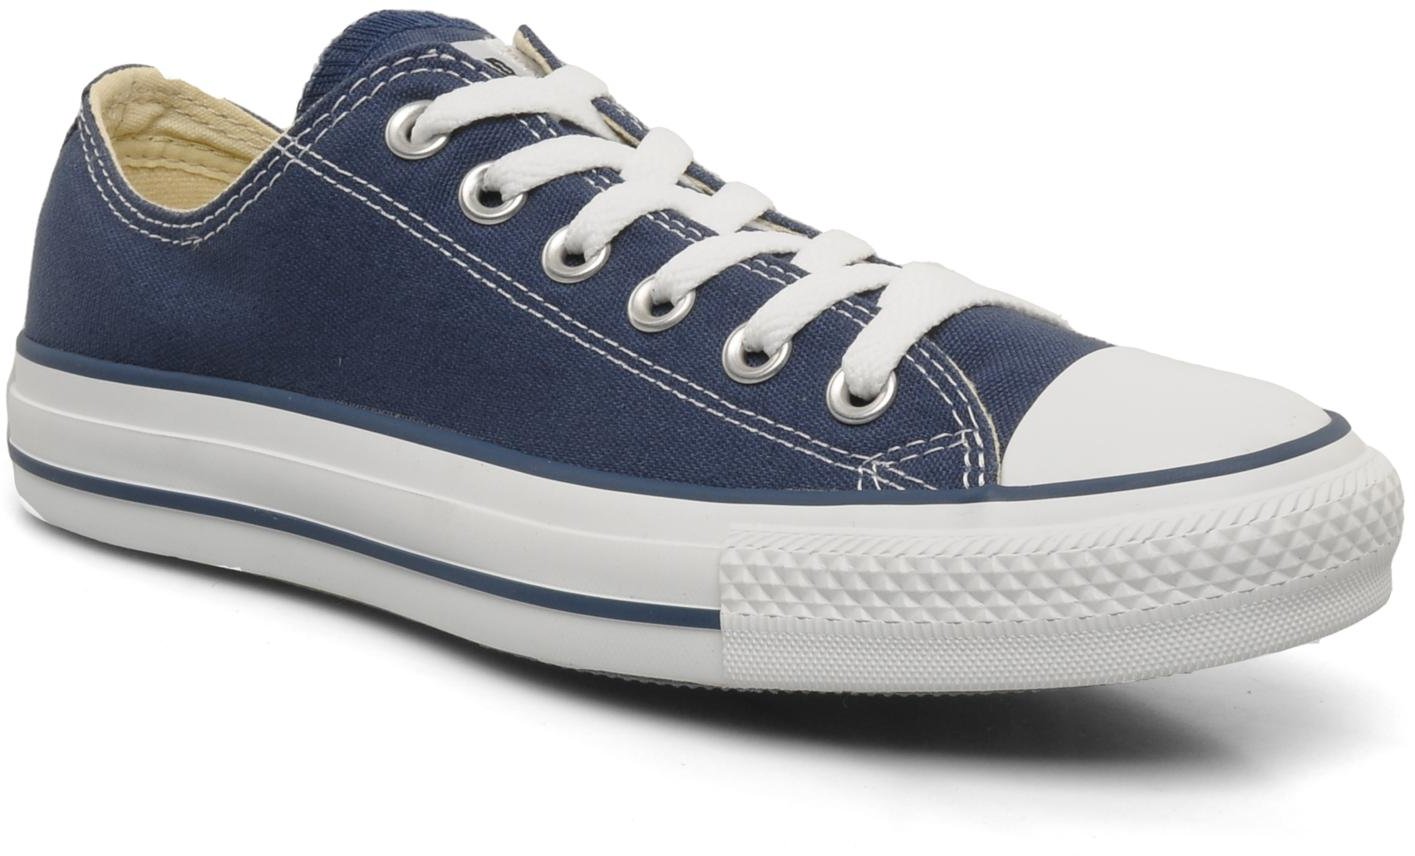 converse all star ox shoes navy